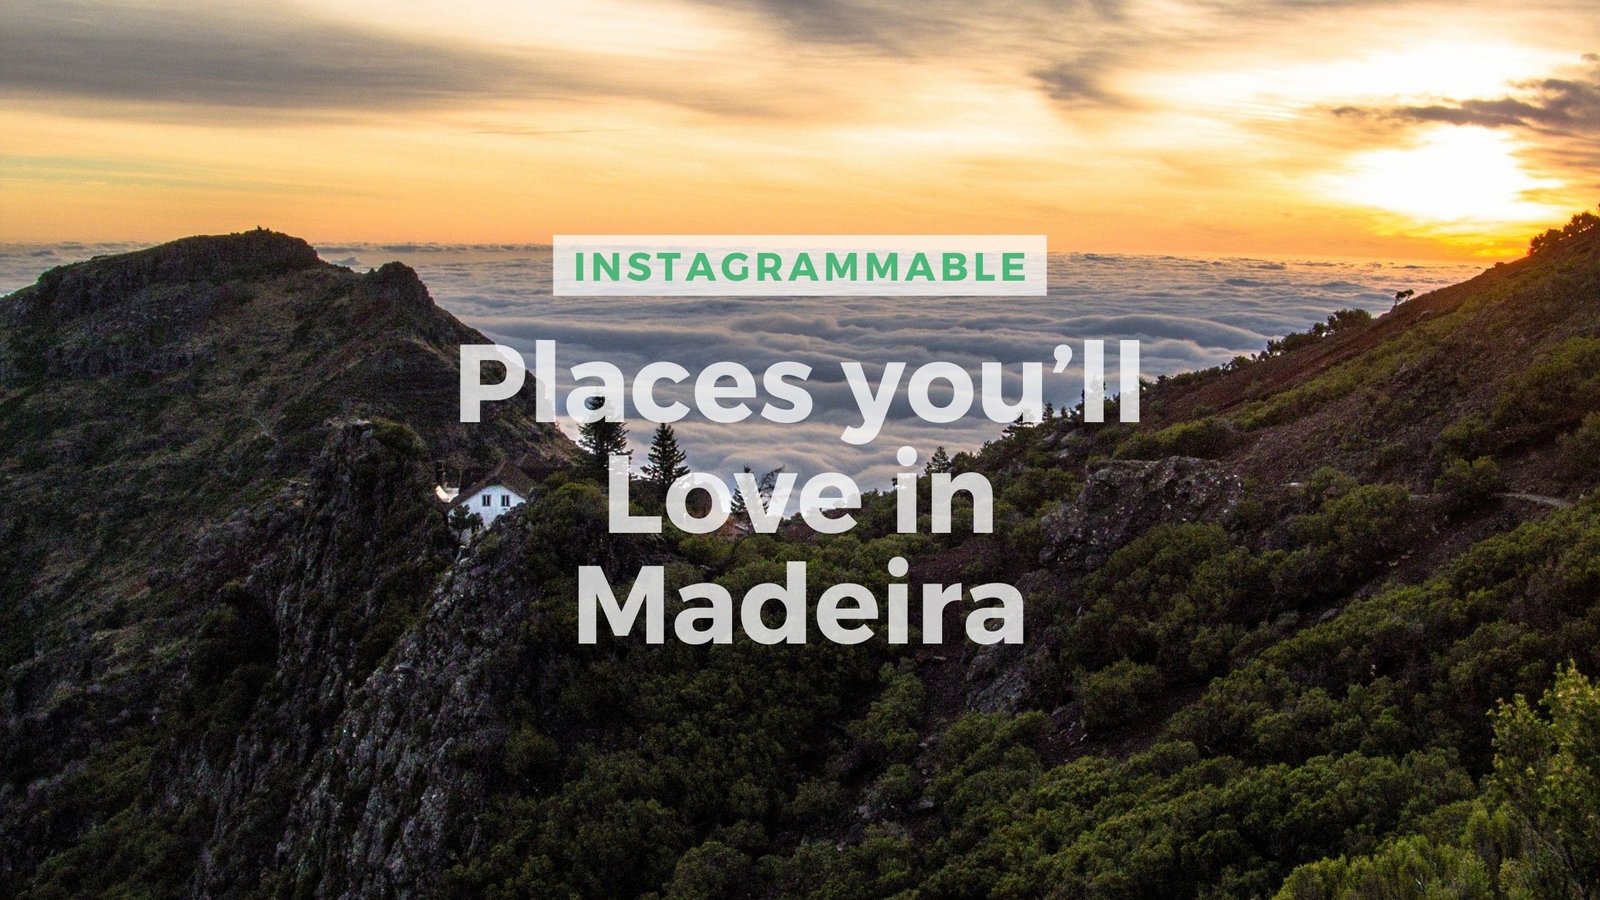 TOP 10 Instagrammable and Amazing Places you’ll Love in Madeira